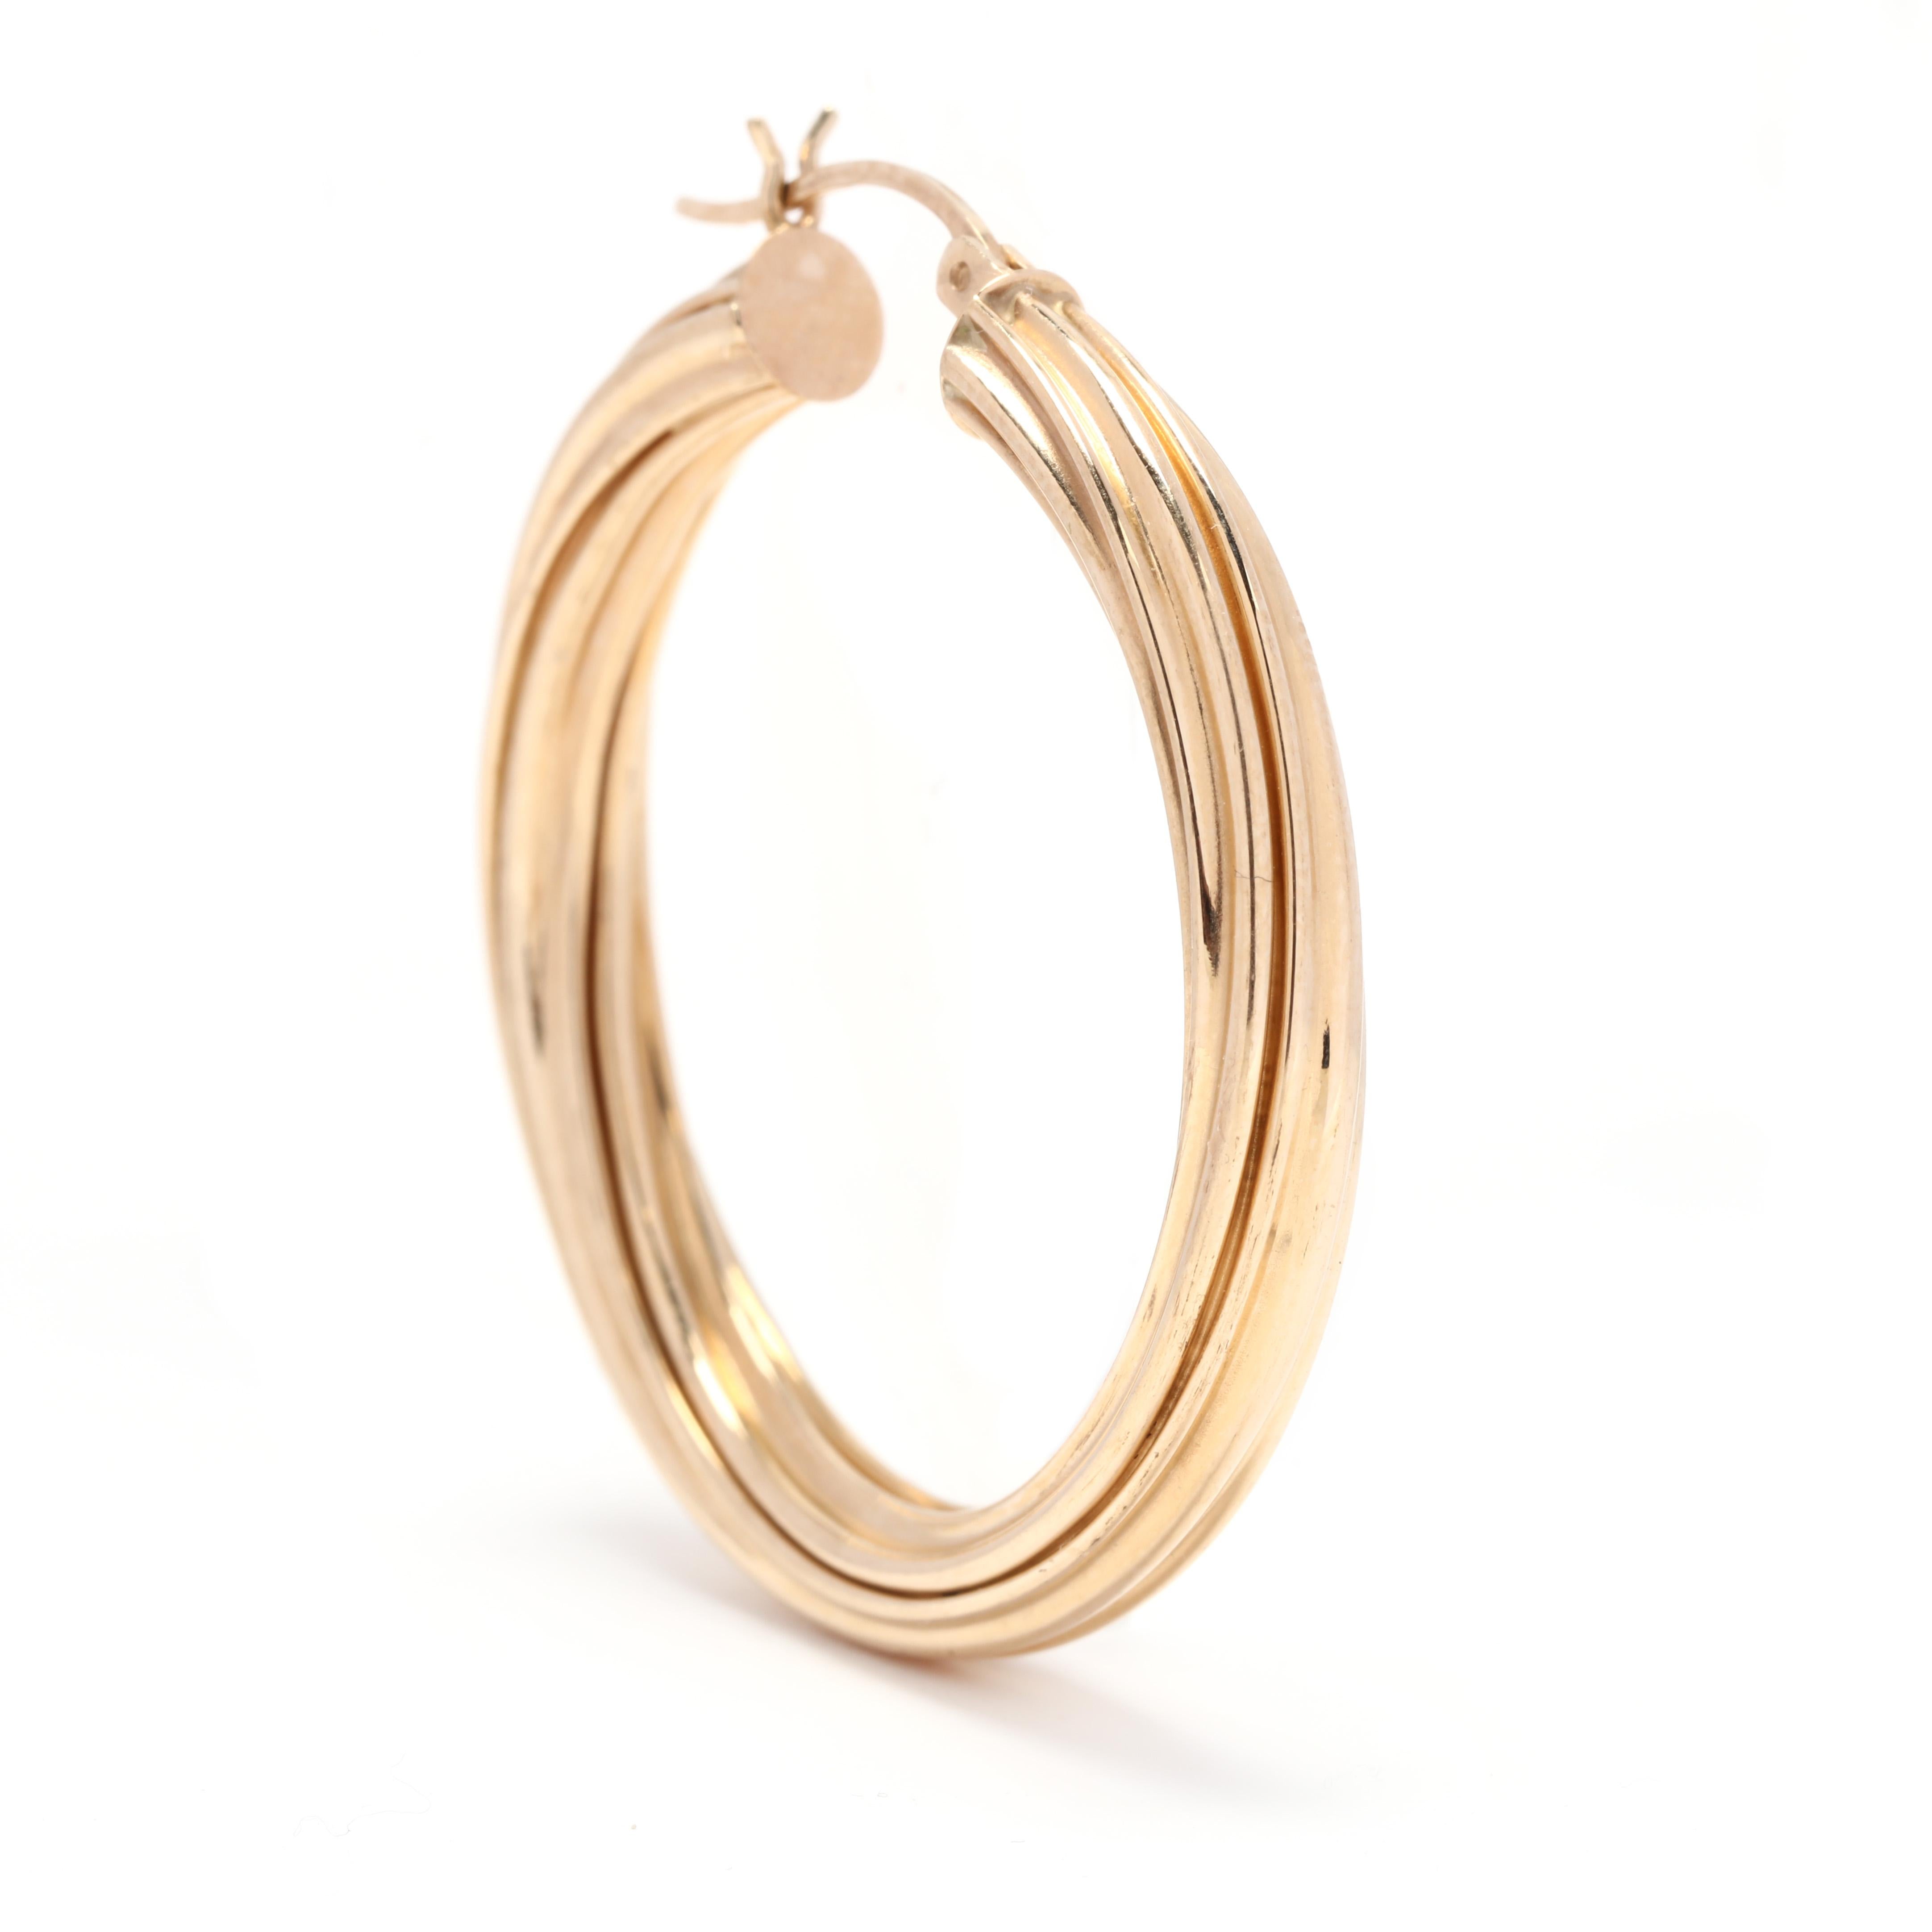 A pair of 14 karat yellow gold large twist hoop earrings. These earrings feature a circular design with a twist cable motif.

Length: 1.5 in.

Width: 5 mm

4.9 dwts.

A Couple Of Things to Note:
* This is a vintage item and may show signs of wear.